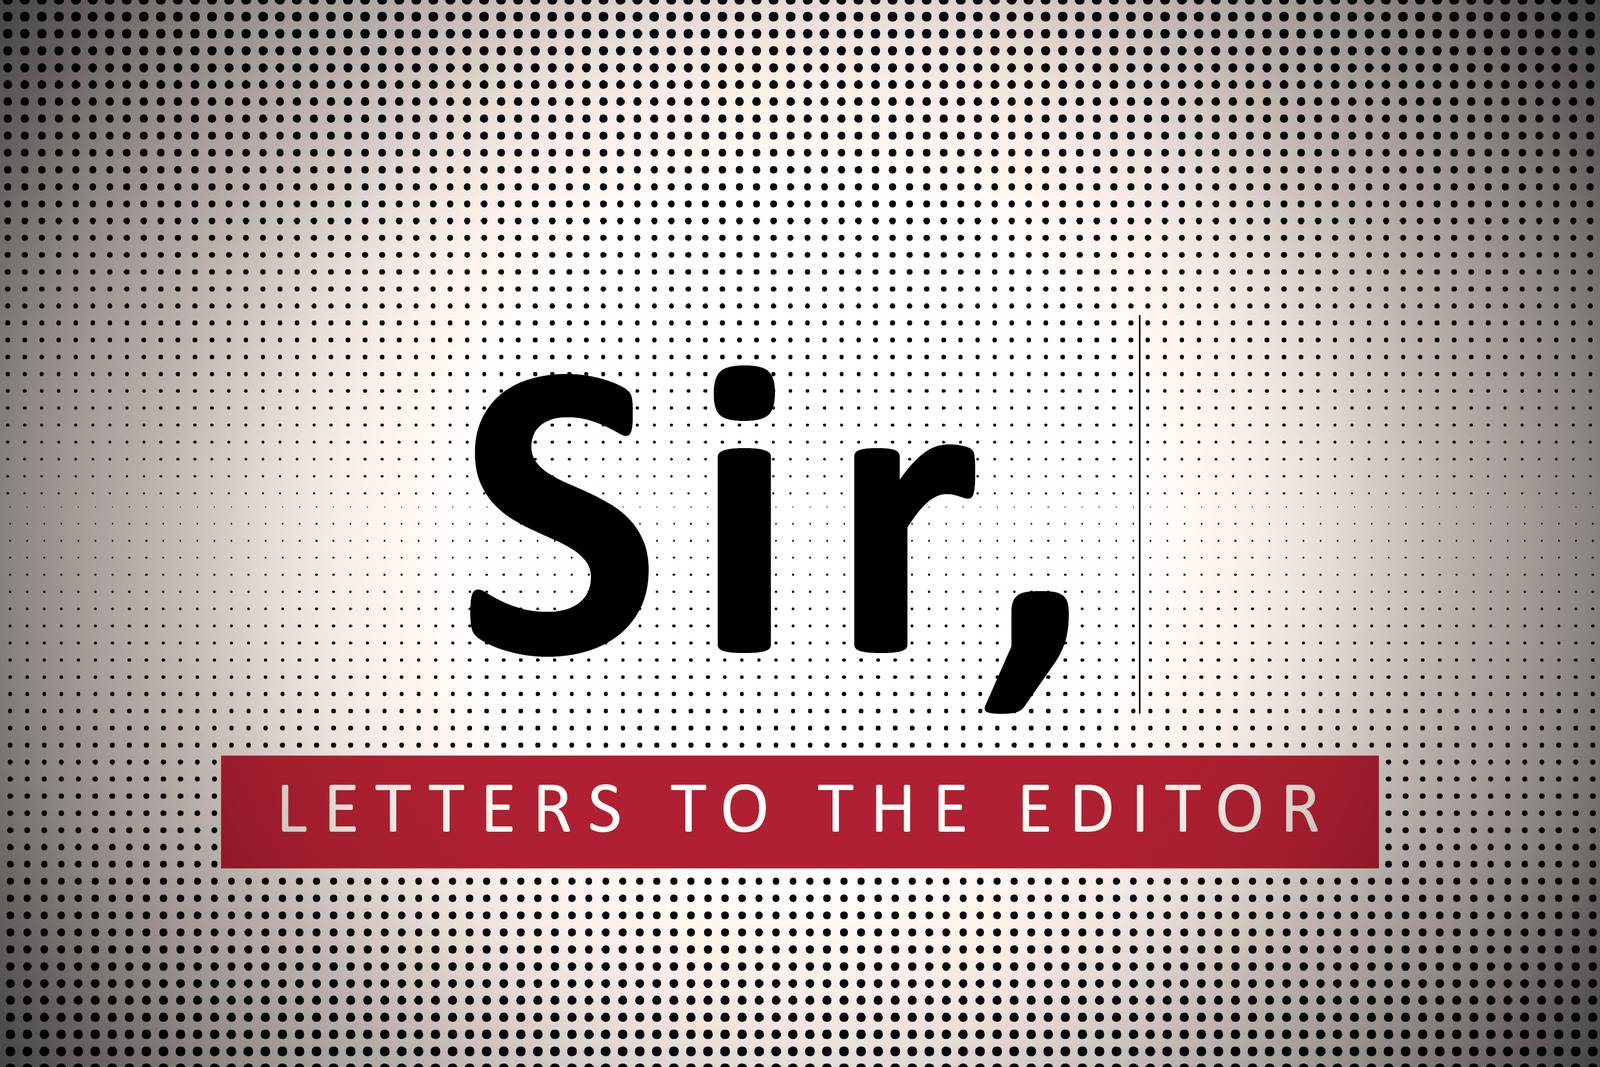 Letters to the Editor. Illustration: Paul Scott